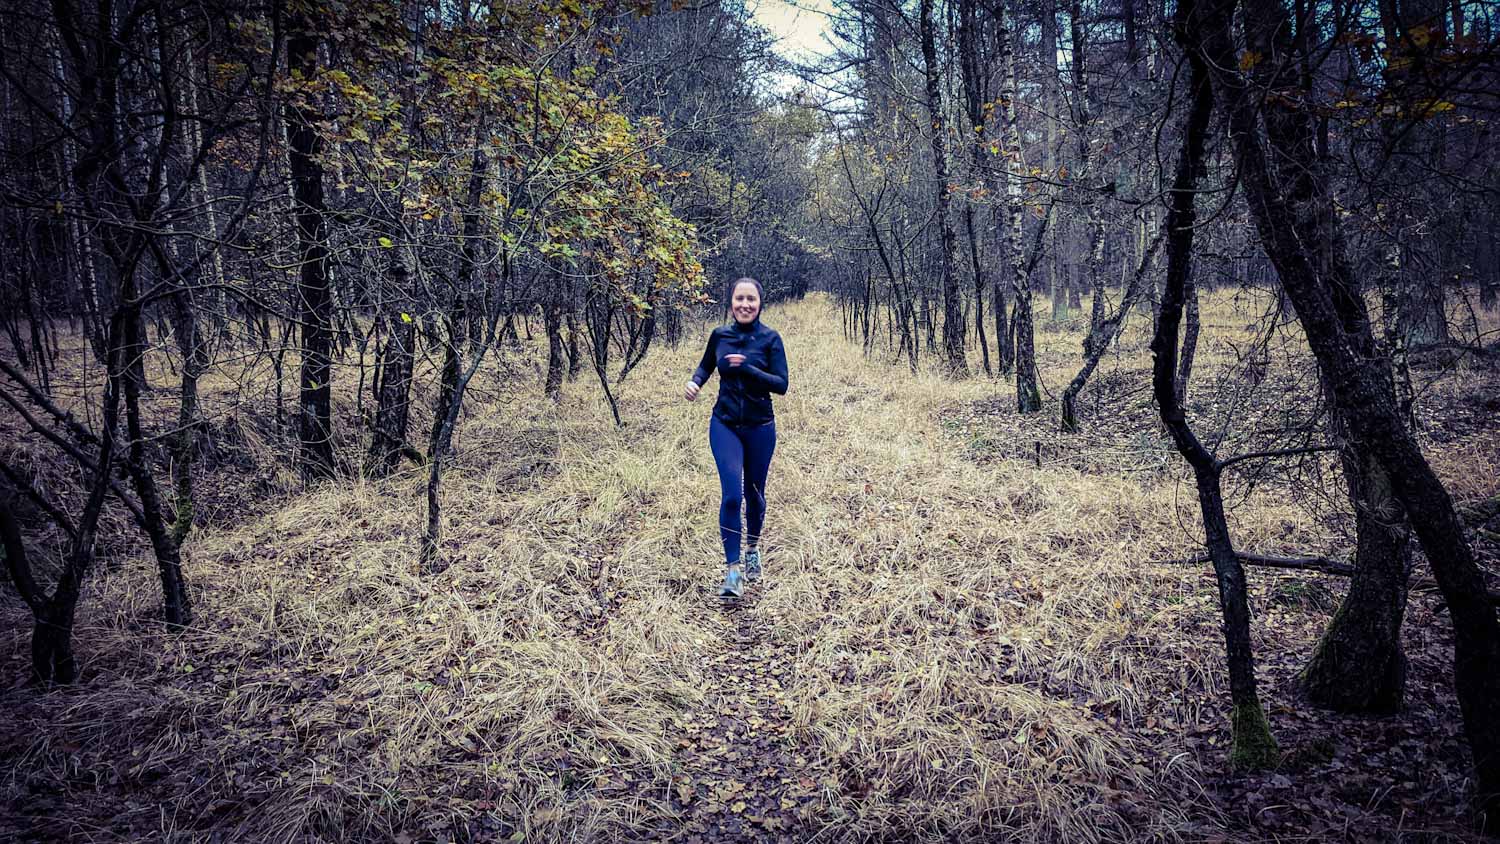 We’re running the Eindejaarstrail (End of the Year) in the Drunense Duinen. It was Sara’s idea. I swear. She is so much fun since she is a runner.